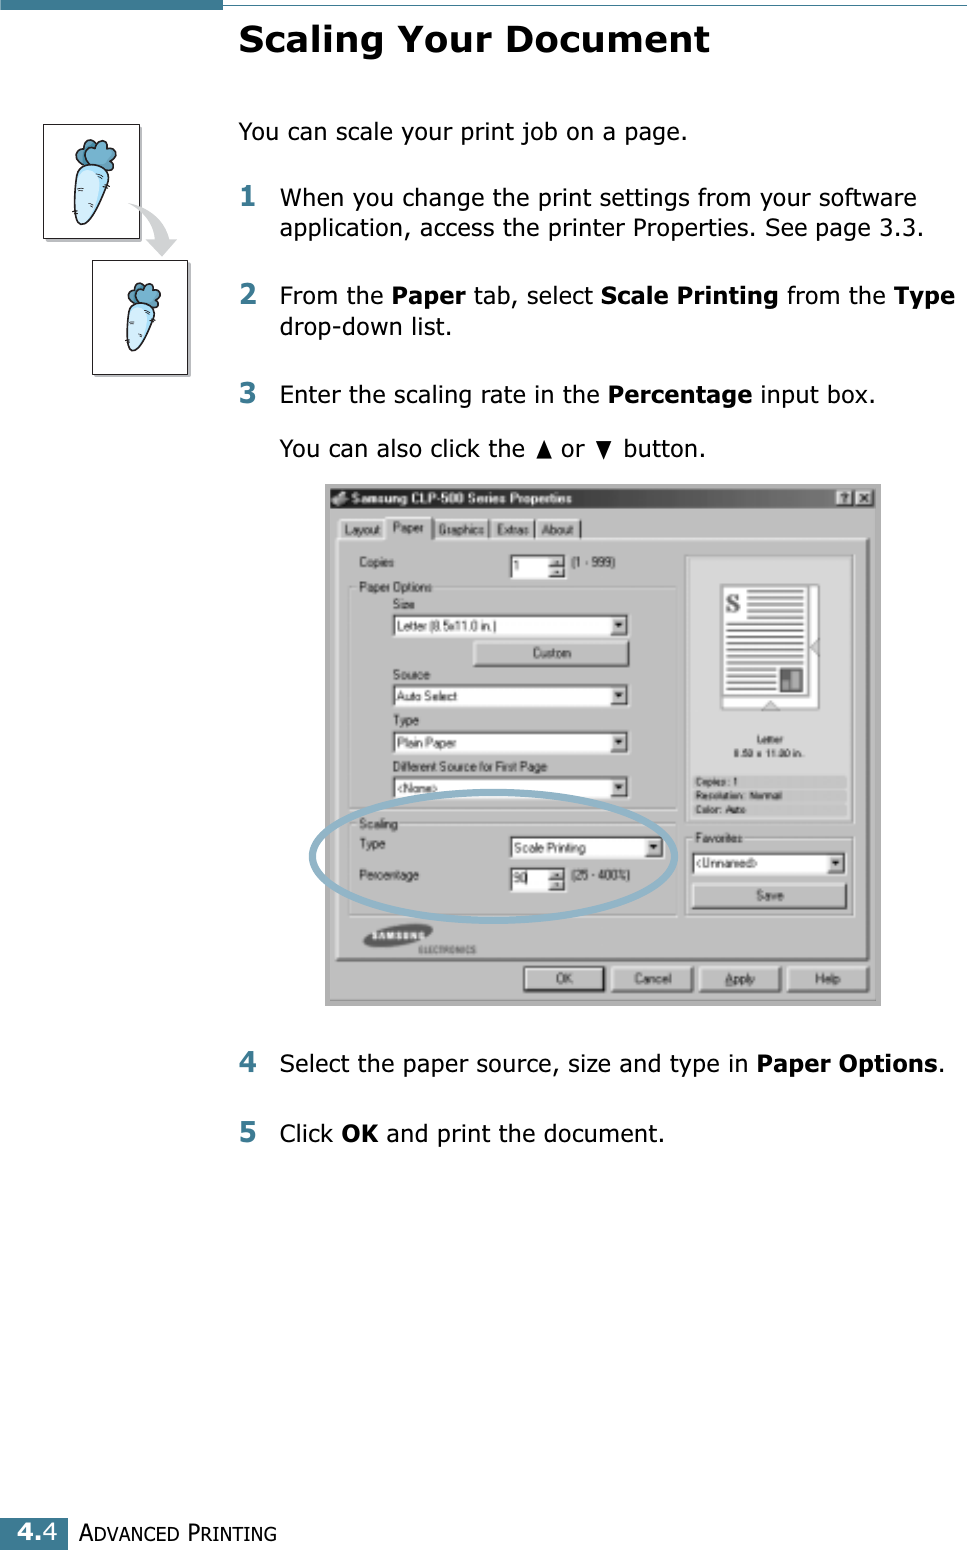 ADVANCED PRINTING4.4Scaling Your DocumentYou can scale your print job on a page. 1When you change the print settings from your software application, access the printer Properties. See page 3.3. 2From the Paper tab, select Scale Printing from the Type drop-down list. 3Enter the scaling rate in the Percentage input box. You can also click the or  button.4Select the paper source, size and type in Paper Options. 5Click OK and print the document. 